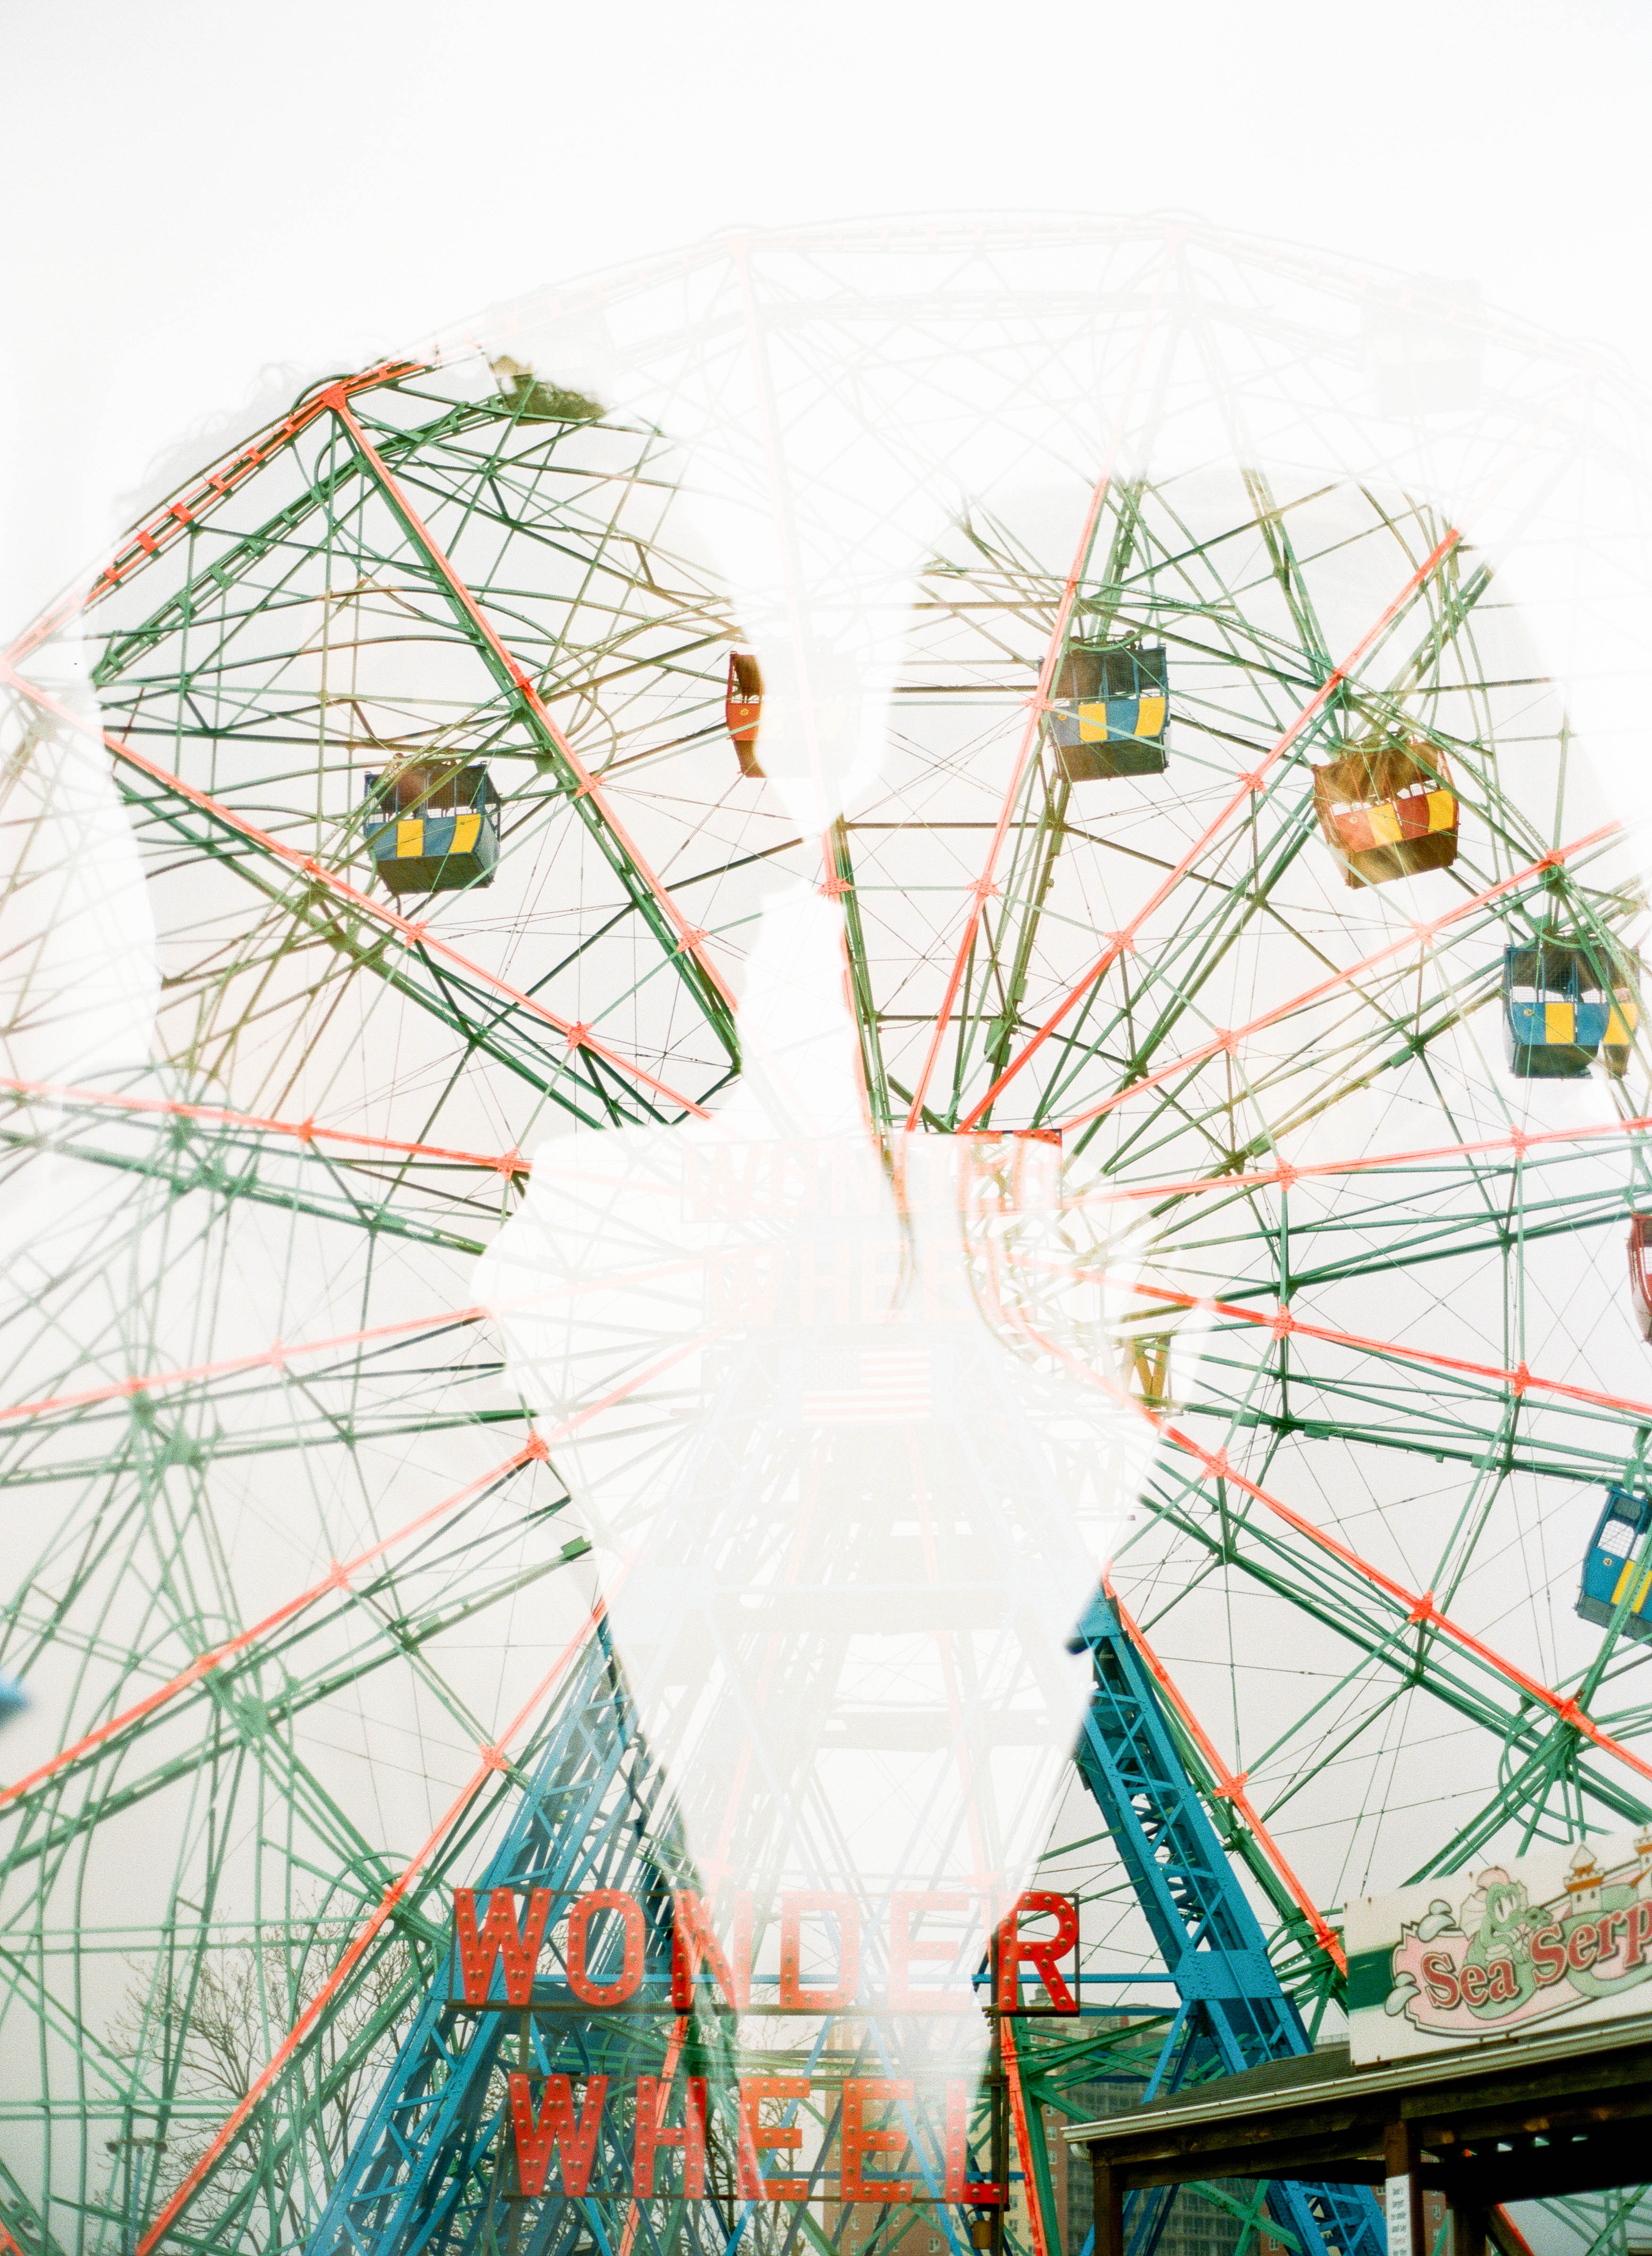 a double exposure of a bride and groom and a ferris wheel at coney island